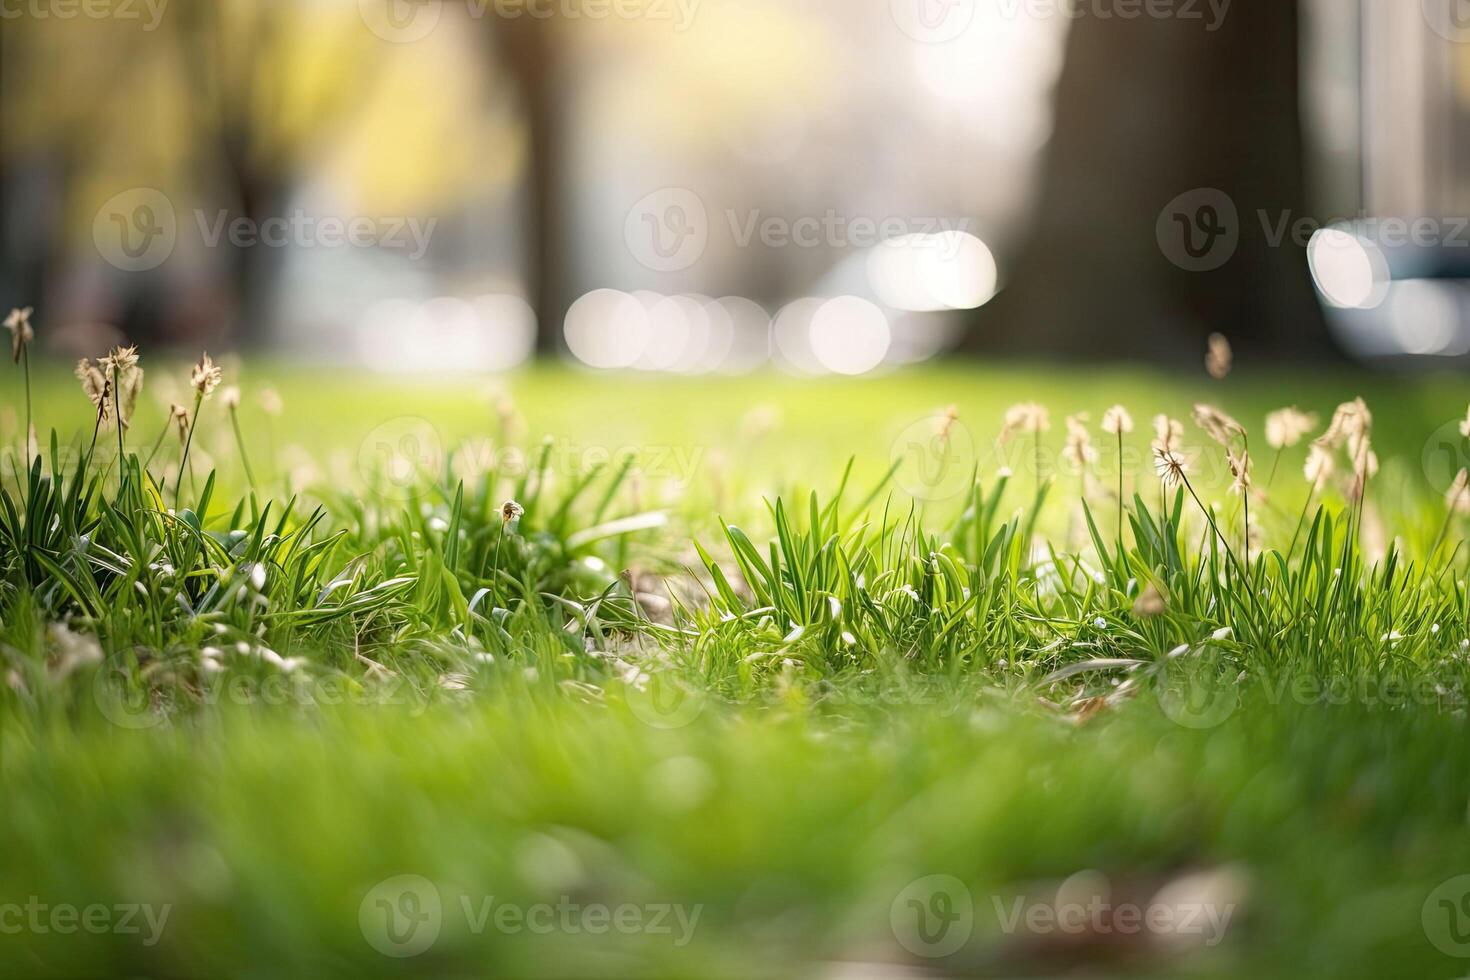 Neatly trimmed lawn on blurred spring background. Ground level view. photo